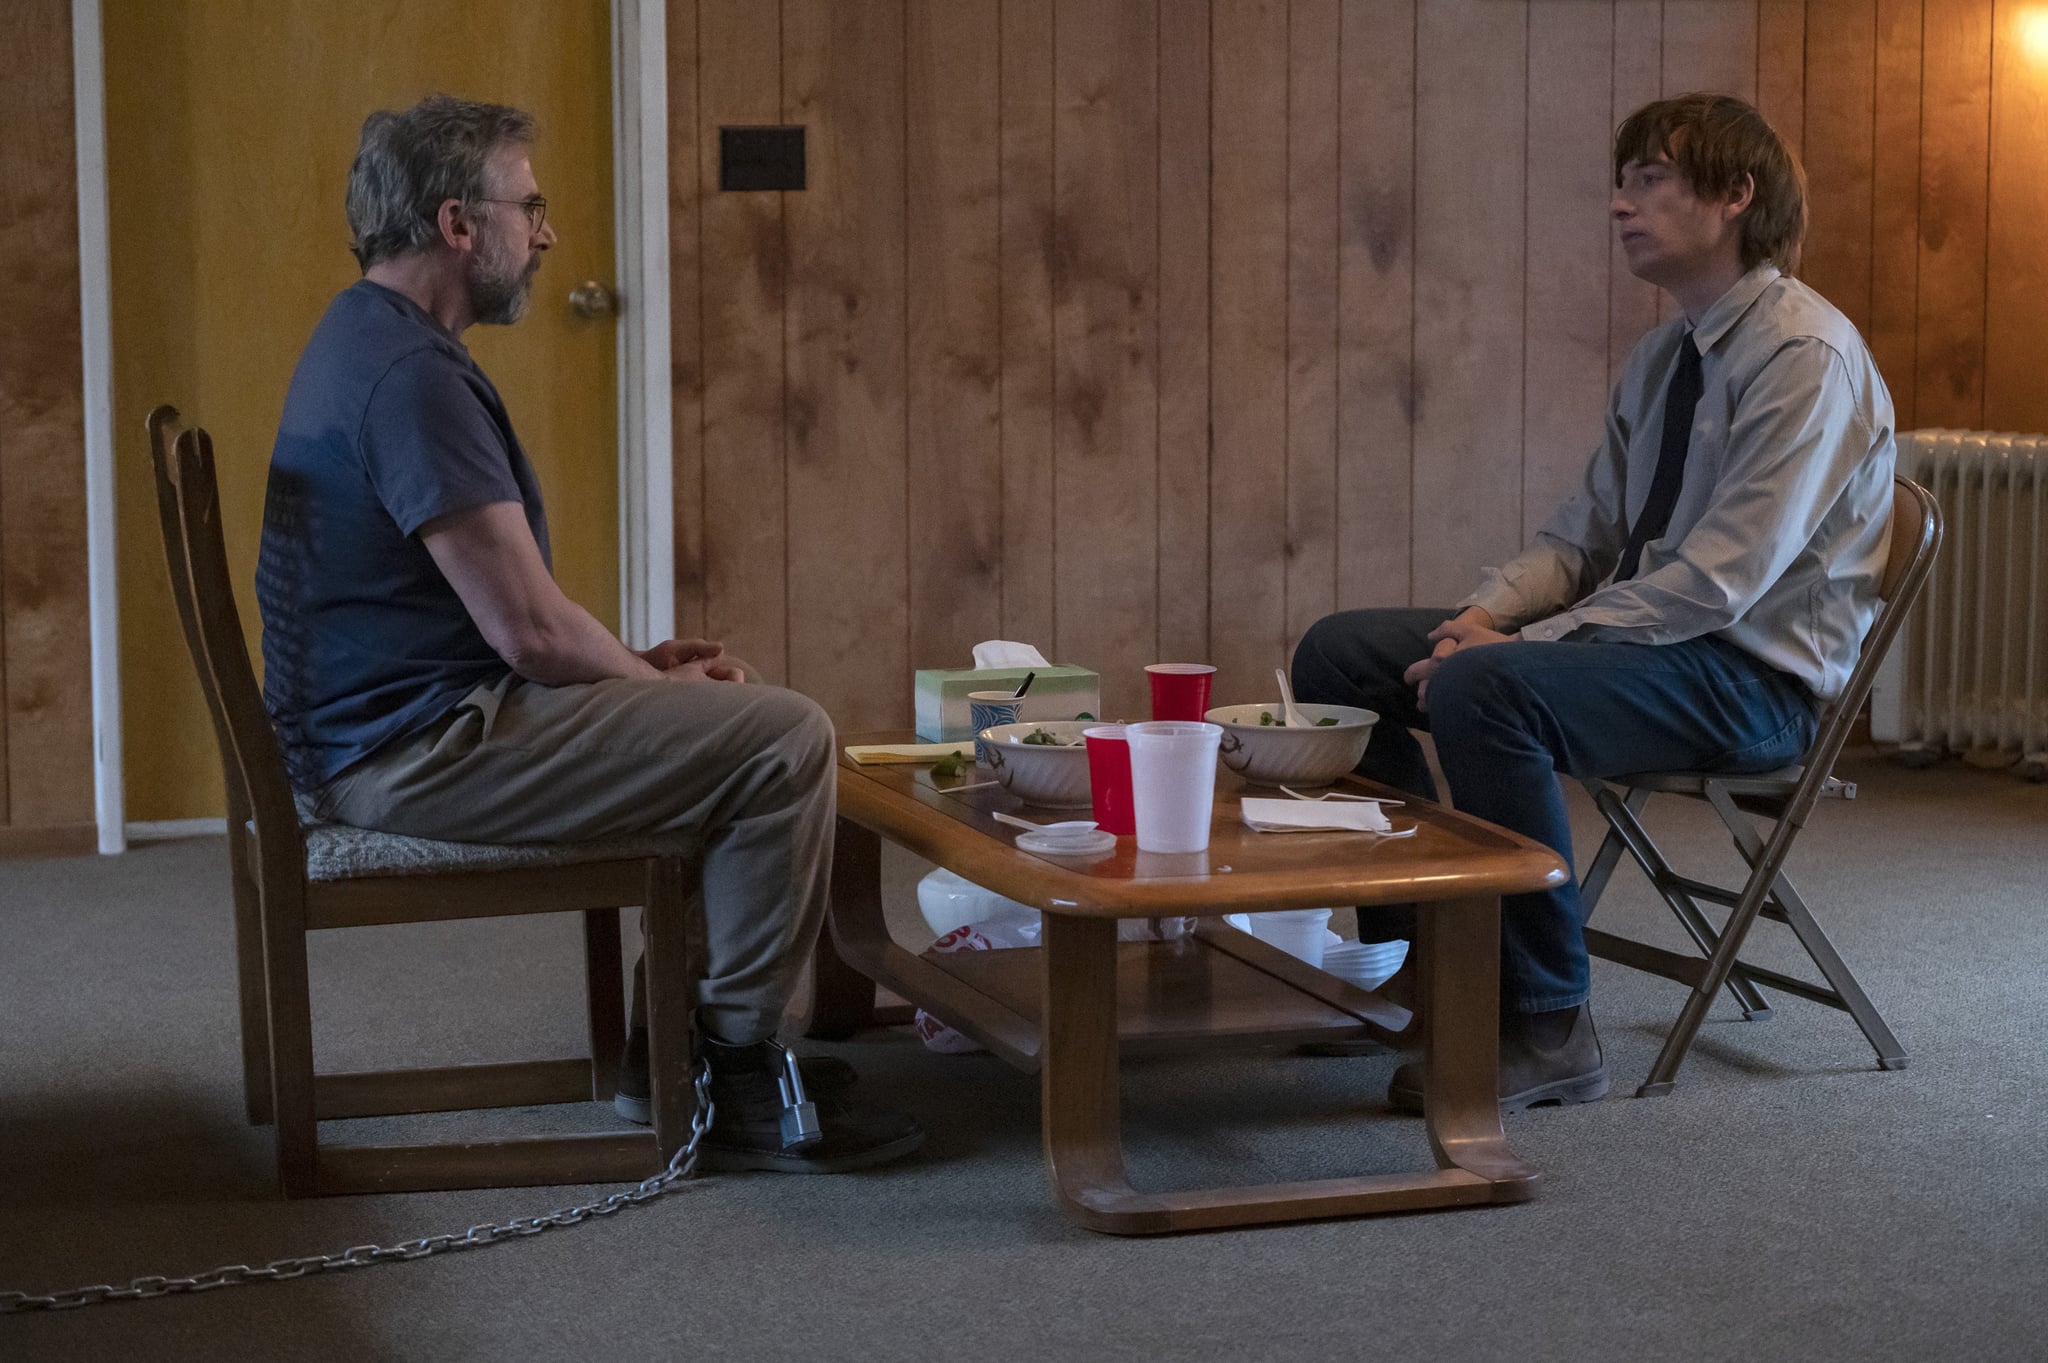 THE PATIENT, from left: Steve Carell, Domhnall Gleeson, Issues', (Season 1, ep. 103, aired Sept. 6, 2022). photo: Suzanne Tenner / FX on Hulu / Courtesy Everett Collection